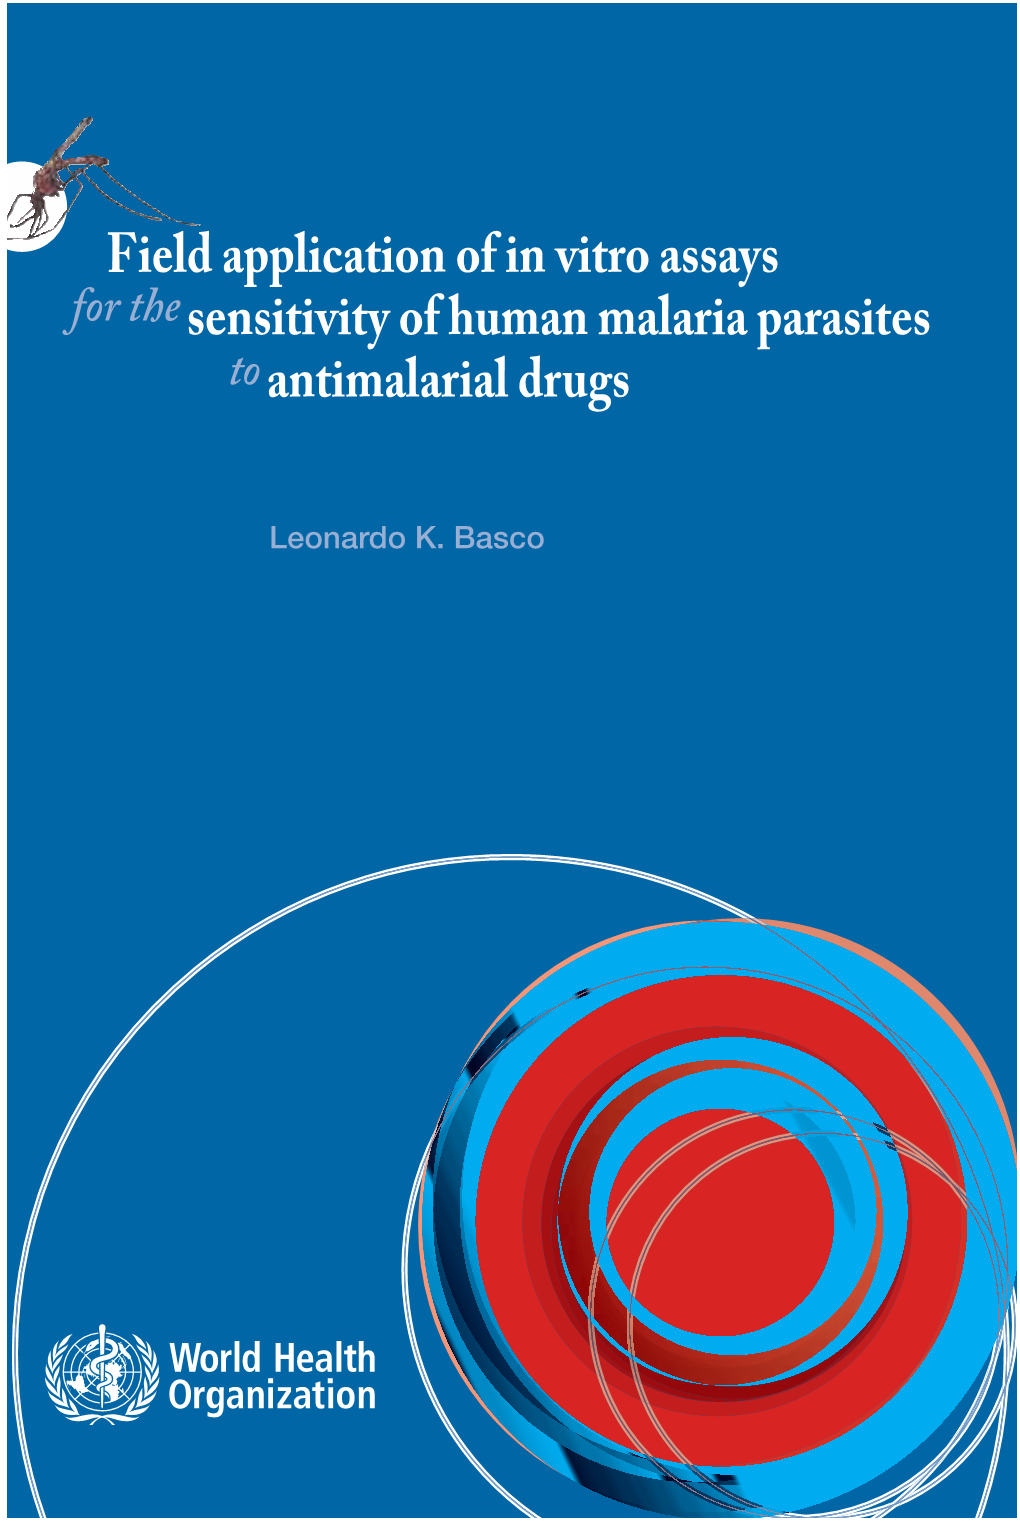 Field Application of in Vitro Assays for the Sensitivity of Human Malaria Parasites to Antimalarial Drugs